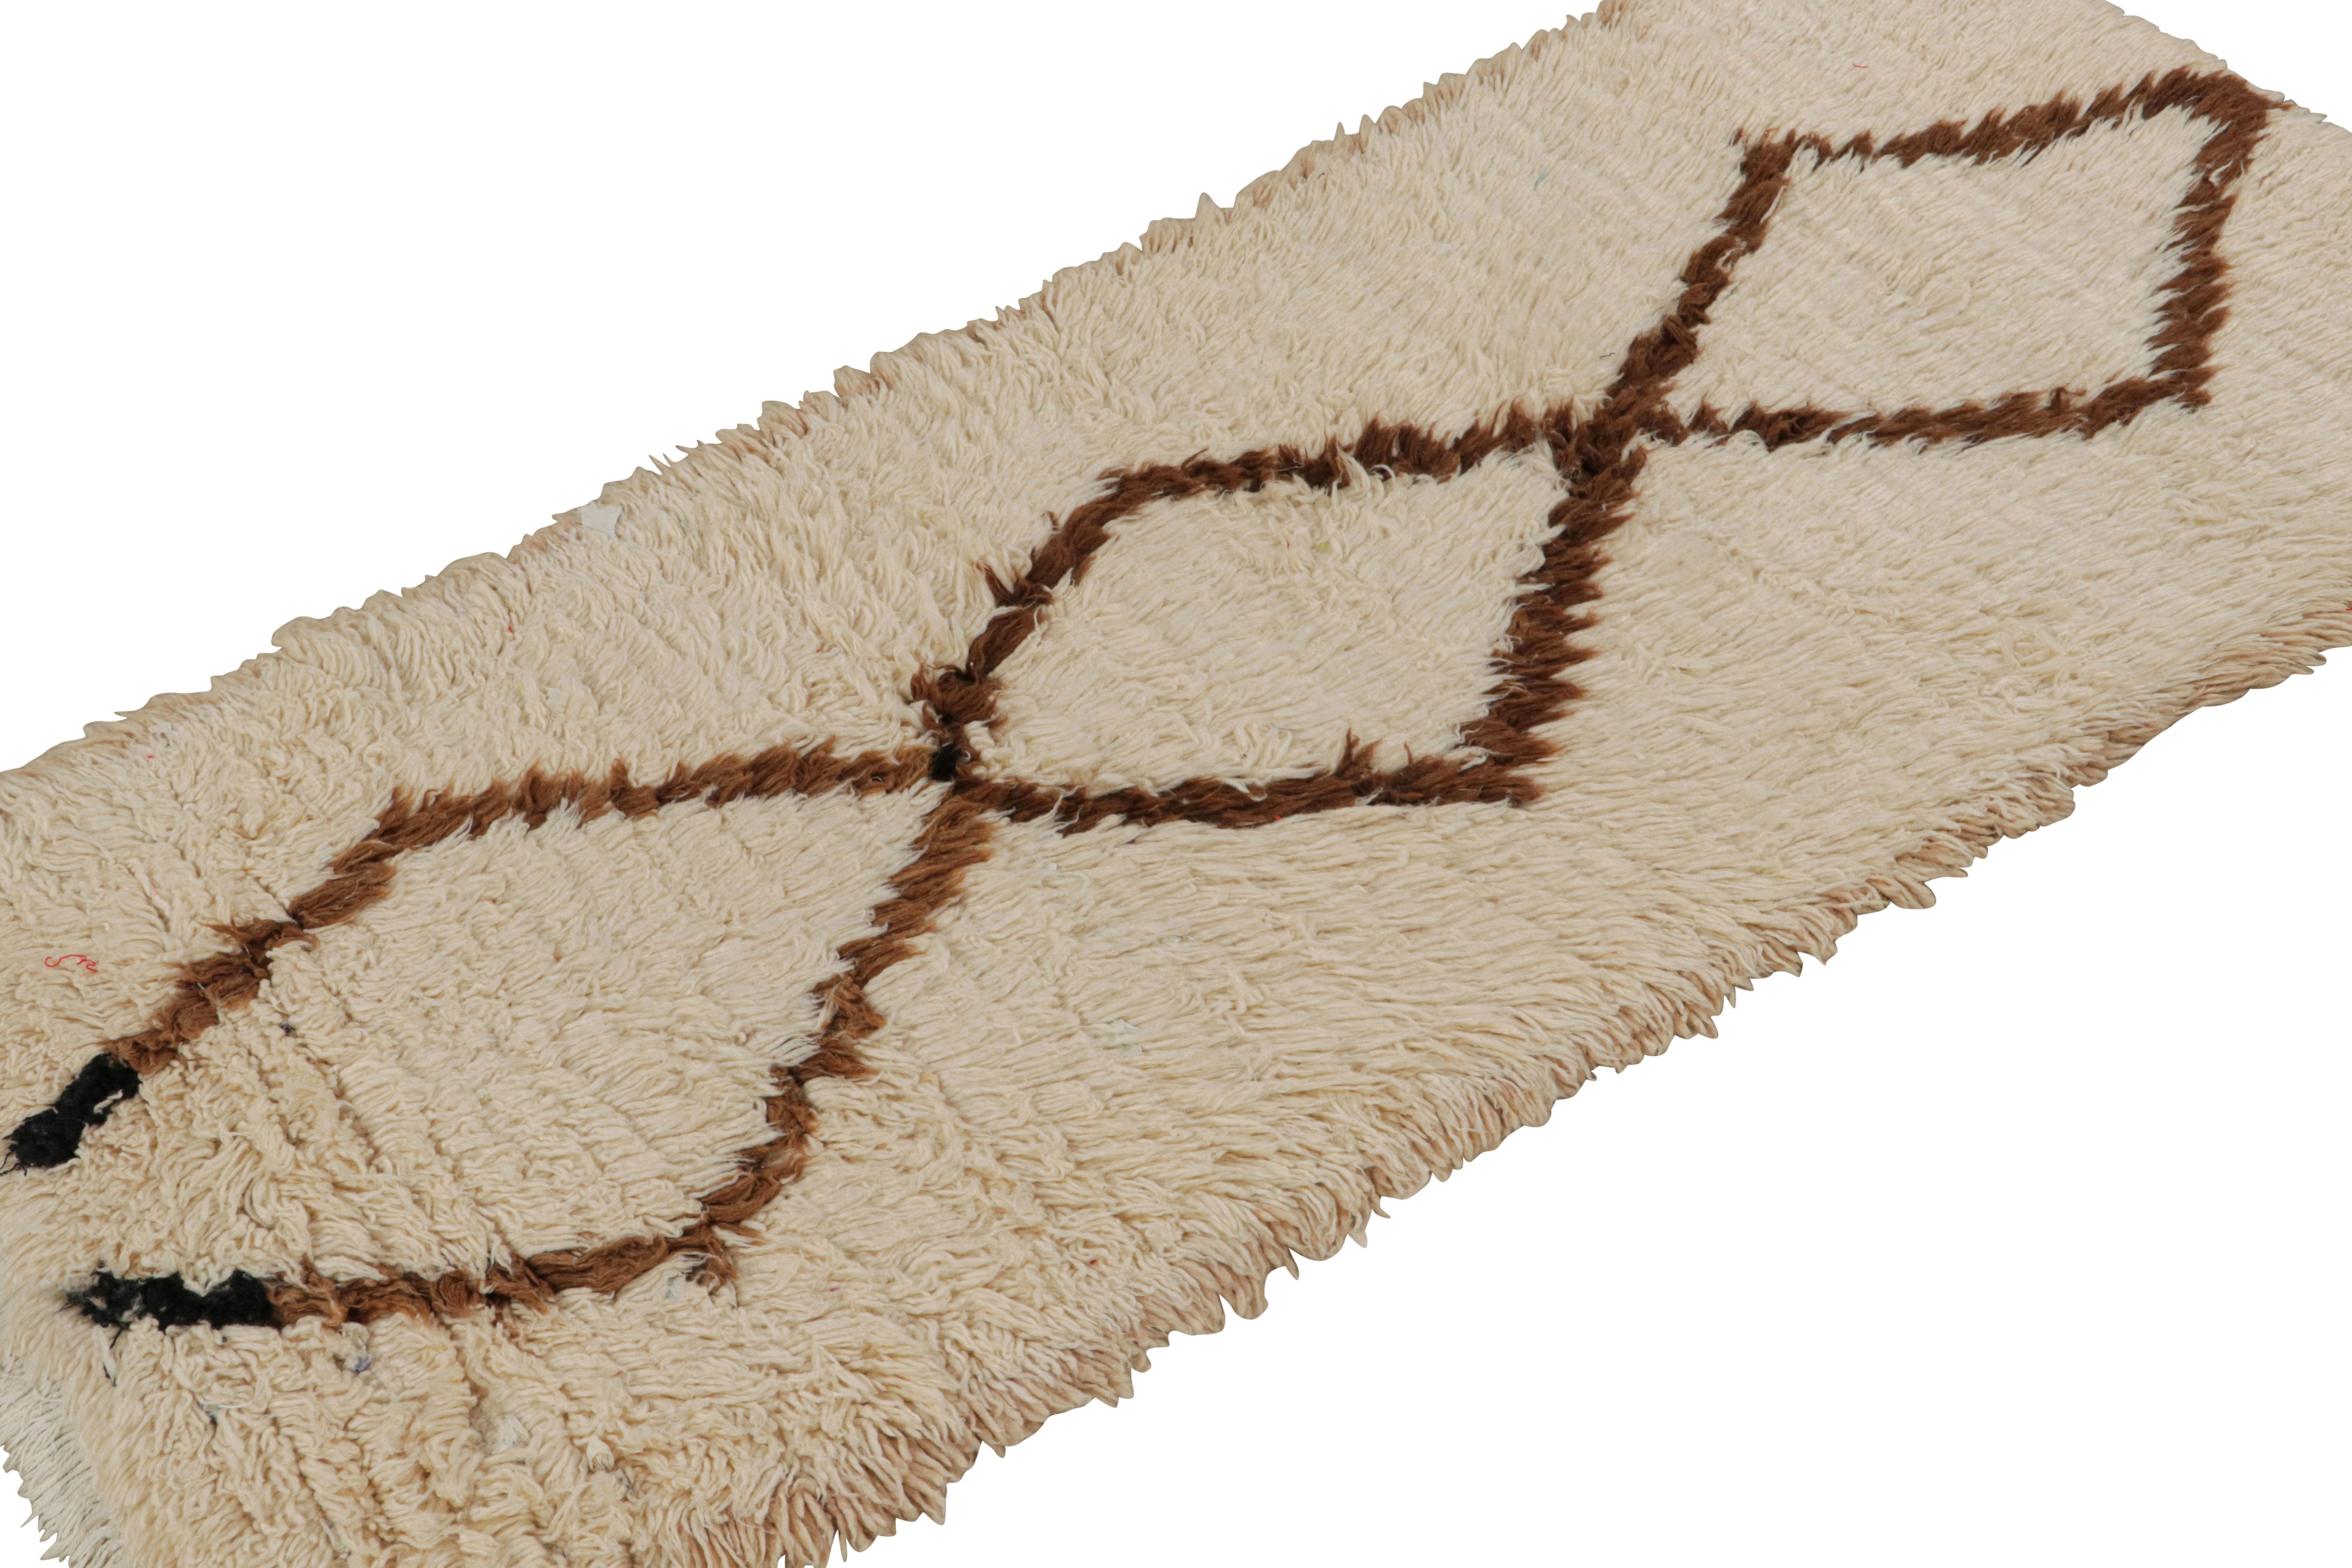 Hand-knotted in wool circa 1950-1960, this 2x6 vintage Moroccan runner rug in beige-brown with diamond medallions, hails from the Azilal tribe.  

On the Design: 

This piece enjoys a lush high pile with primitivist Berber geometric diamond